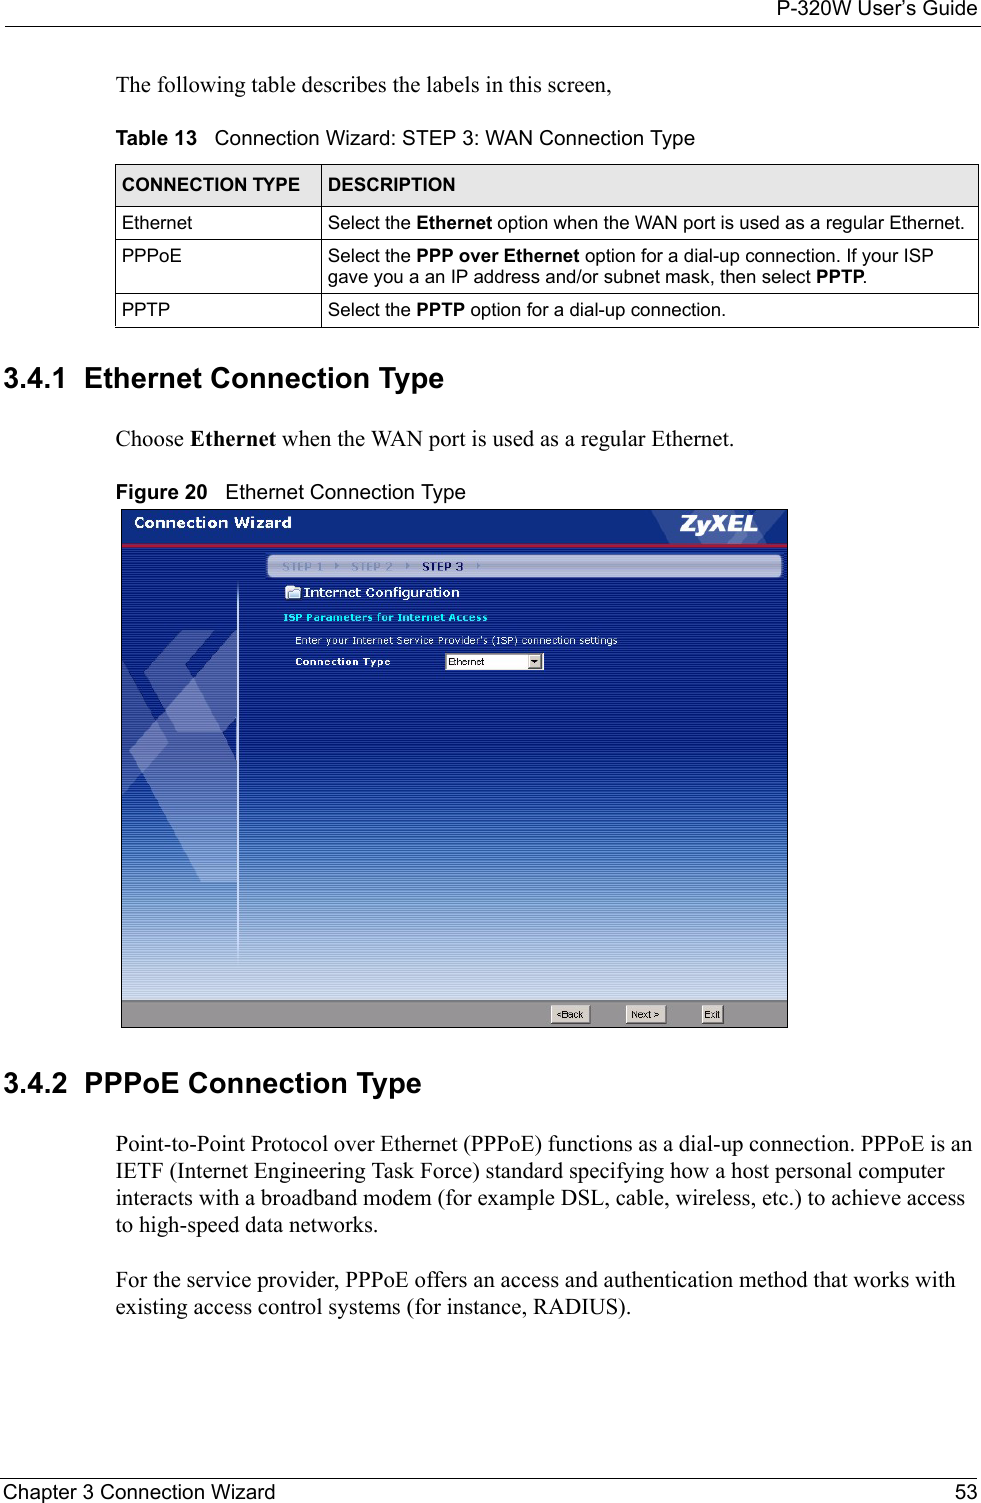 P-320W User’s GuideChapter 3 Connection Wizard 53The following table describes the labels in this screen,Table 13   Connection Wizard: STEP 3: WAN Connection TypeCONNECTION TYPE DESCRIPTIONEthernet Select the Ethernet option when the WAN port is used as a regular Ethernet. PPPoE Select the PPP over Ethernet option for a dial-up connection. If your ISP gave you a an IP address and/or subnet mask, then select PPTP.PPTP Select the PPTP option for a dial-up connection.3.4.1  Ethernet Connection TypeChoose Ethernet when the WAN port is used as a regular Ethernet.Figure 20   Ethernet Connection Type3.4.2  PPPoE Connection TypePoint-to-Point Protocol over Ethernet (PPPoE) functions as a dial-up connection. PPPoE is an IETF (Internet Engineering Task Force) standard specifying how a host personal computer interacts with a broadband modem (for example DSL, cable, wireless, etc.) to achieve access to high-speed data networks.For the service provider, PPPoE offers an access and authentication method that works with existing access control systems (for instance, RADIUS).